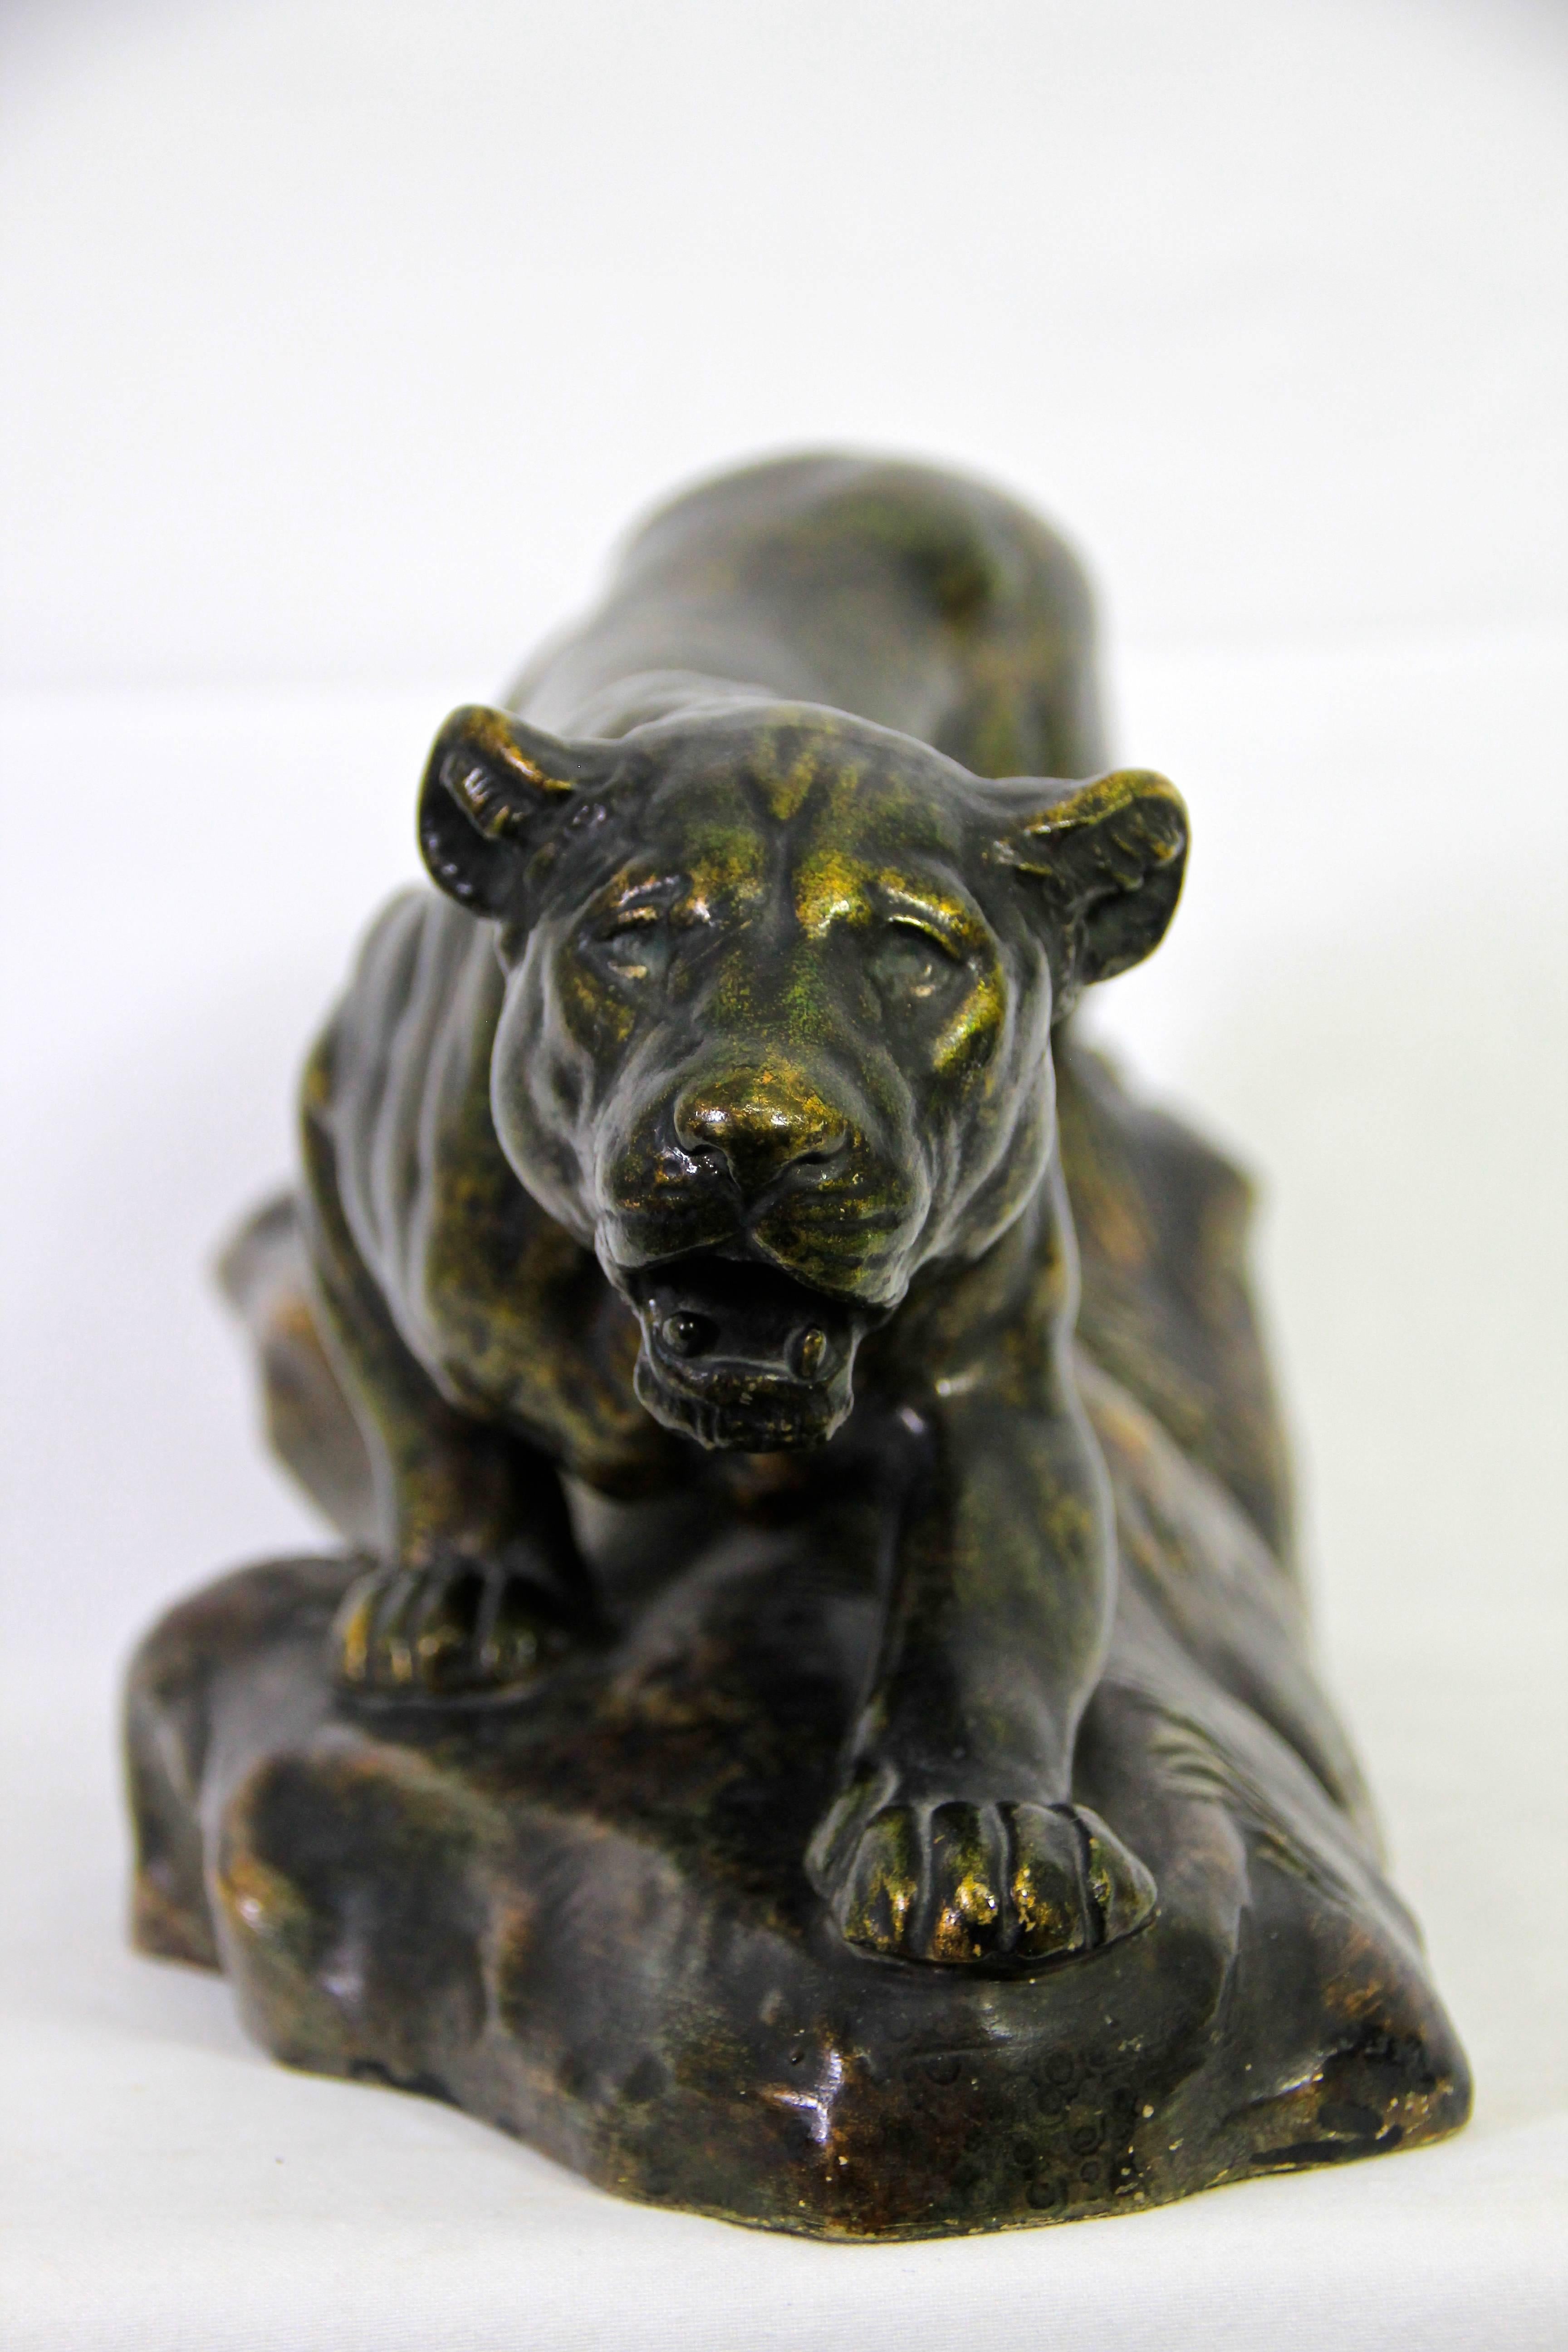 This exceptional Majolica Lioness sculpture is coming from the world renown manufacture of Bernhard Bloch-from the famous Eichwald region in Germany.
The perfect design of this very rare piece was created and signedby Th. Schoop. On the bottom you